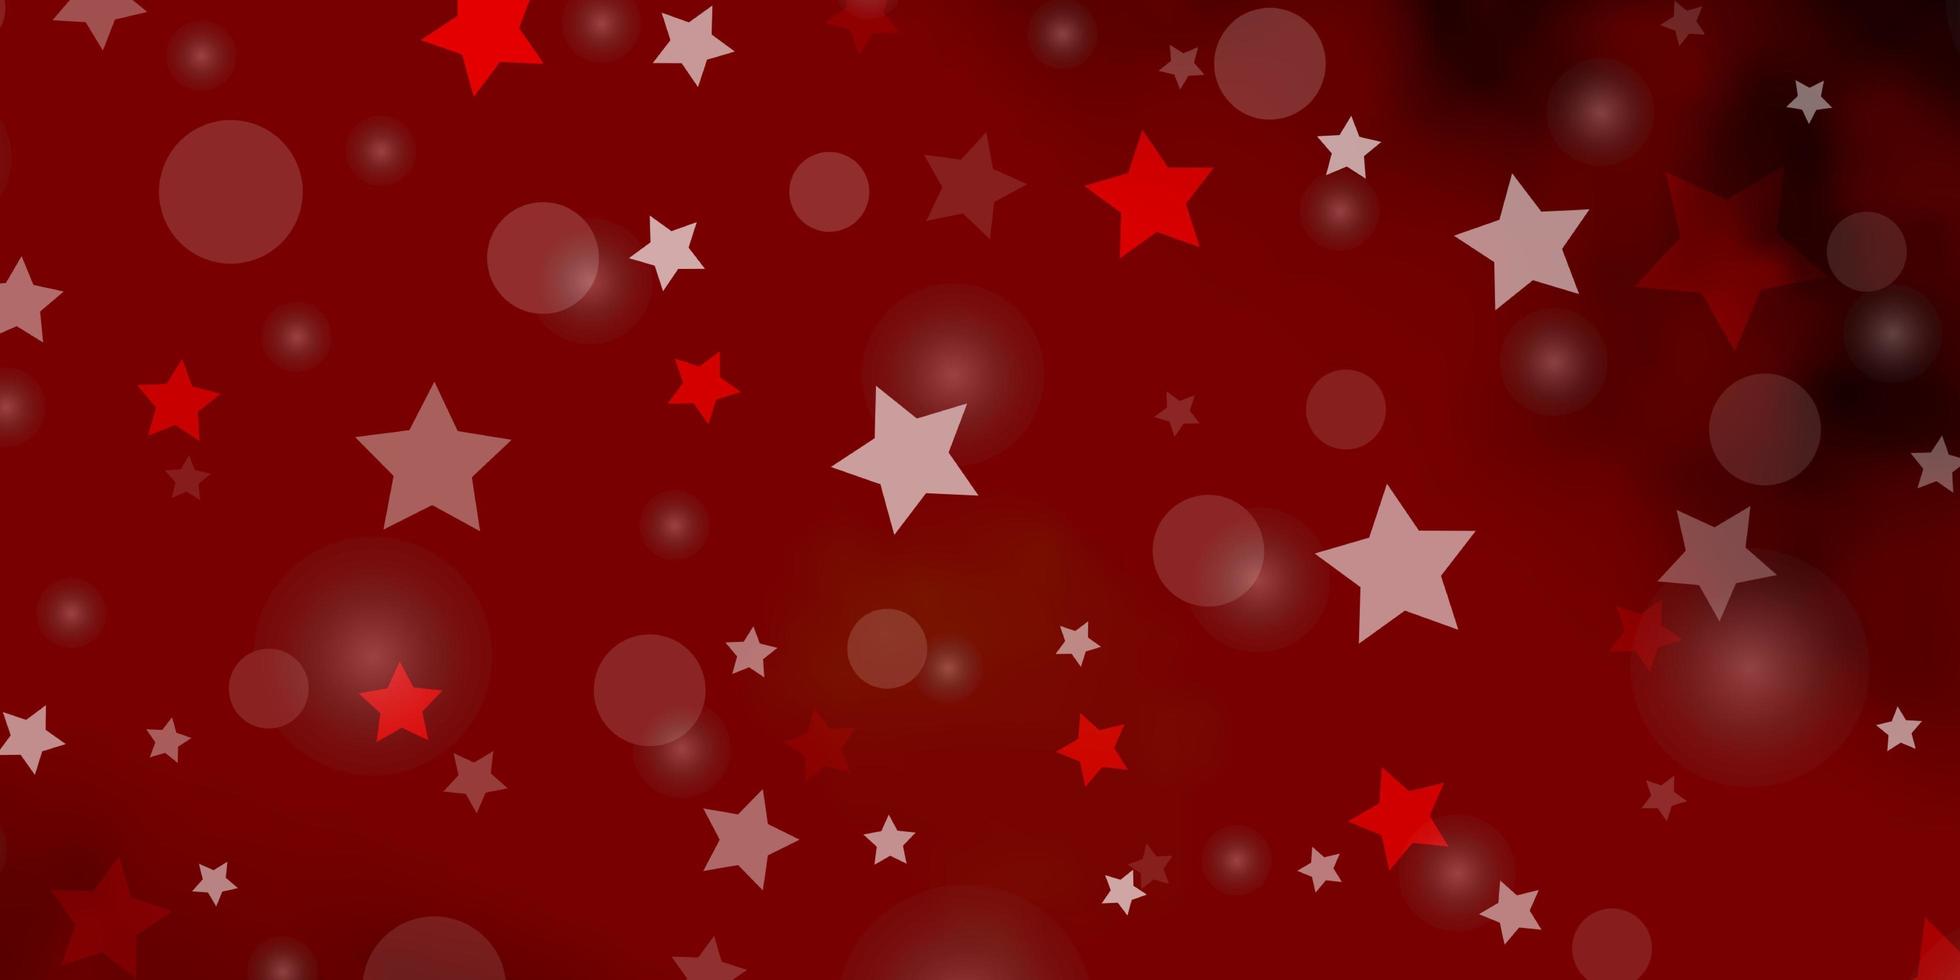 Dark Red vector background with circles, stars. Colorful illustration with gradient dots, stars. Template for business cards, websites.